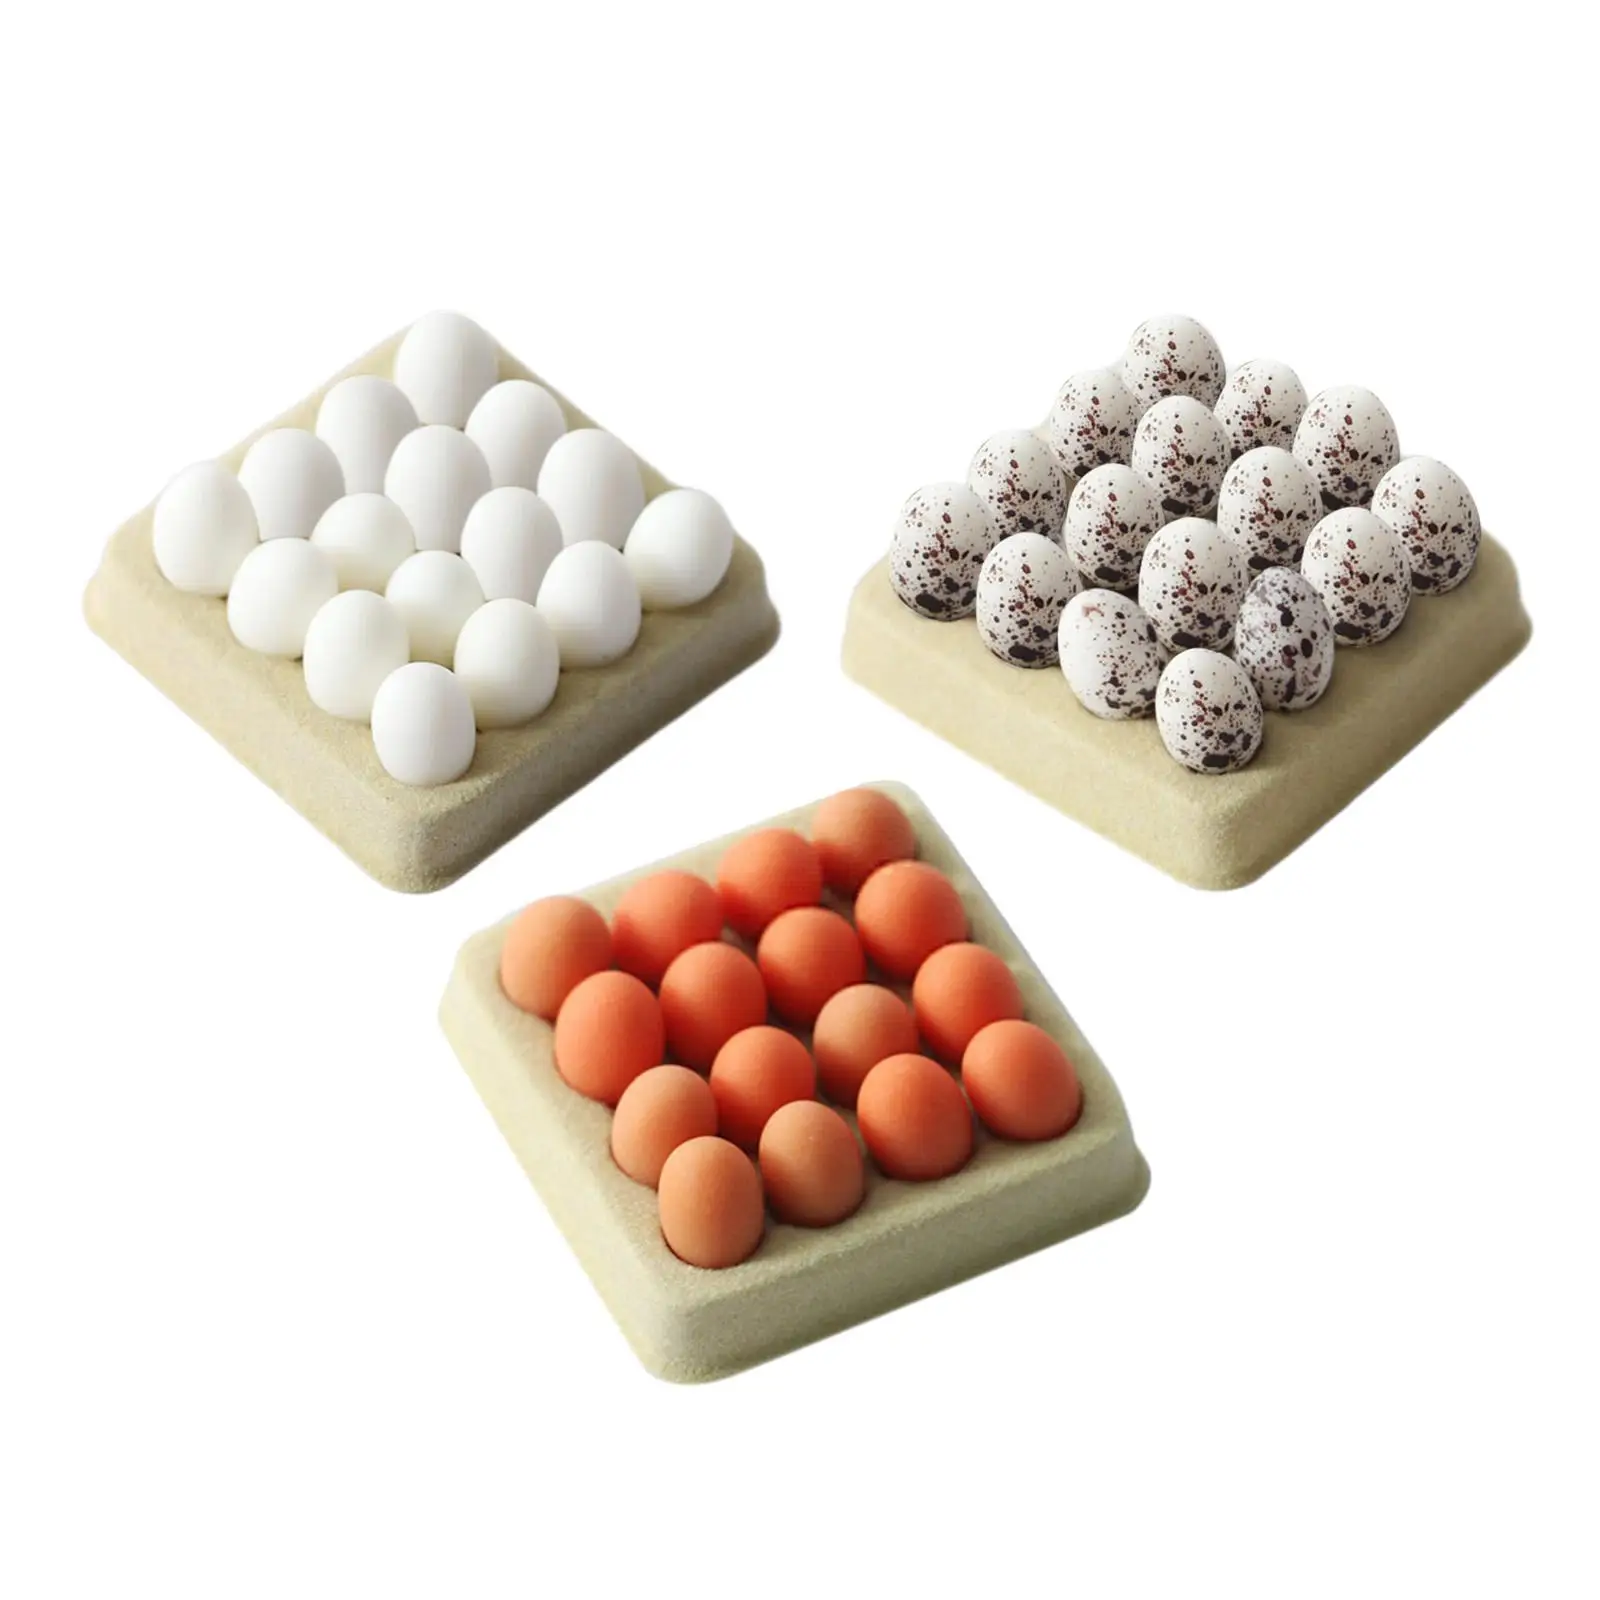 1/12 Dollhouse Miniature Eggs Miniatures Scenes Accessories Children Cooking Toys for Living Room